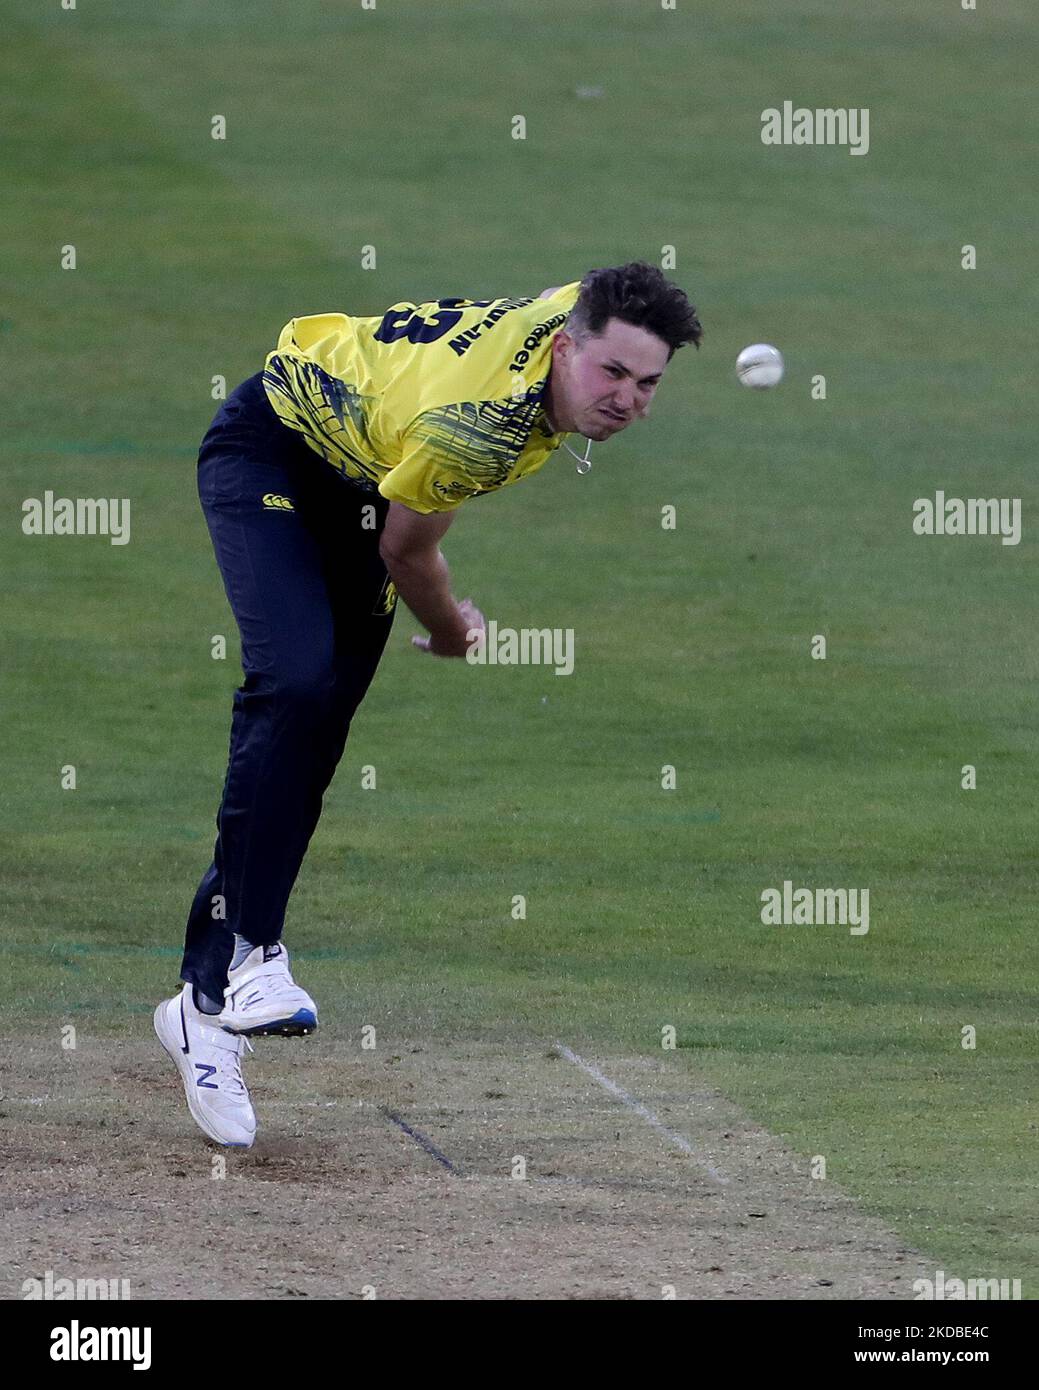 JUN 1st Durham's Paul Coughlin bowling during the Vitality T20 Blast match between Durham County Cricket Club and Worcestershire at the Seat Unique Riverside, Chester le Street on Wednesday 1st June 2022. (Photo by Mark Fletcher /MI News/NurPhoto) Stock Photo